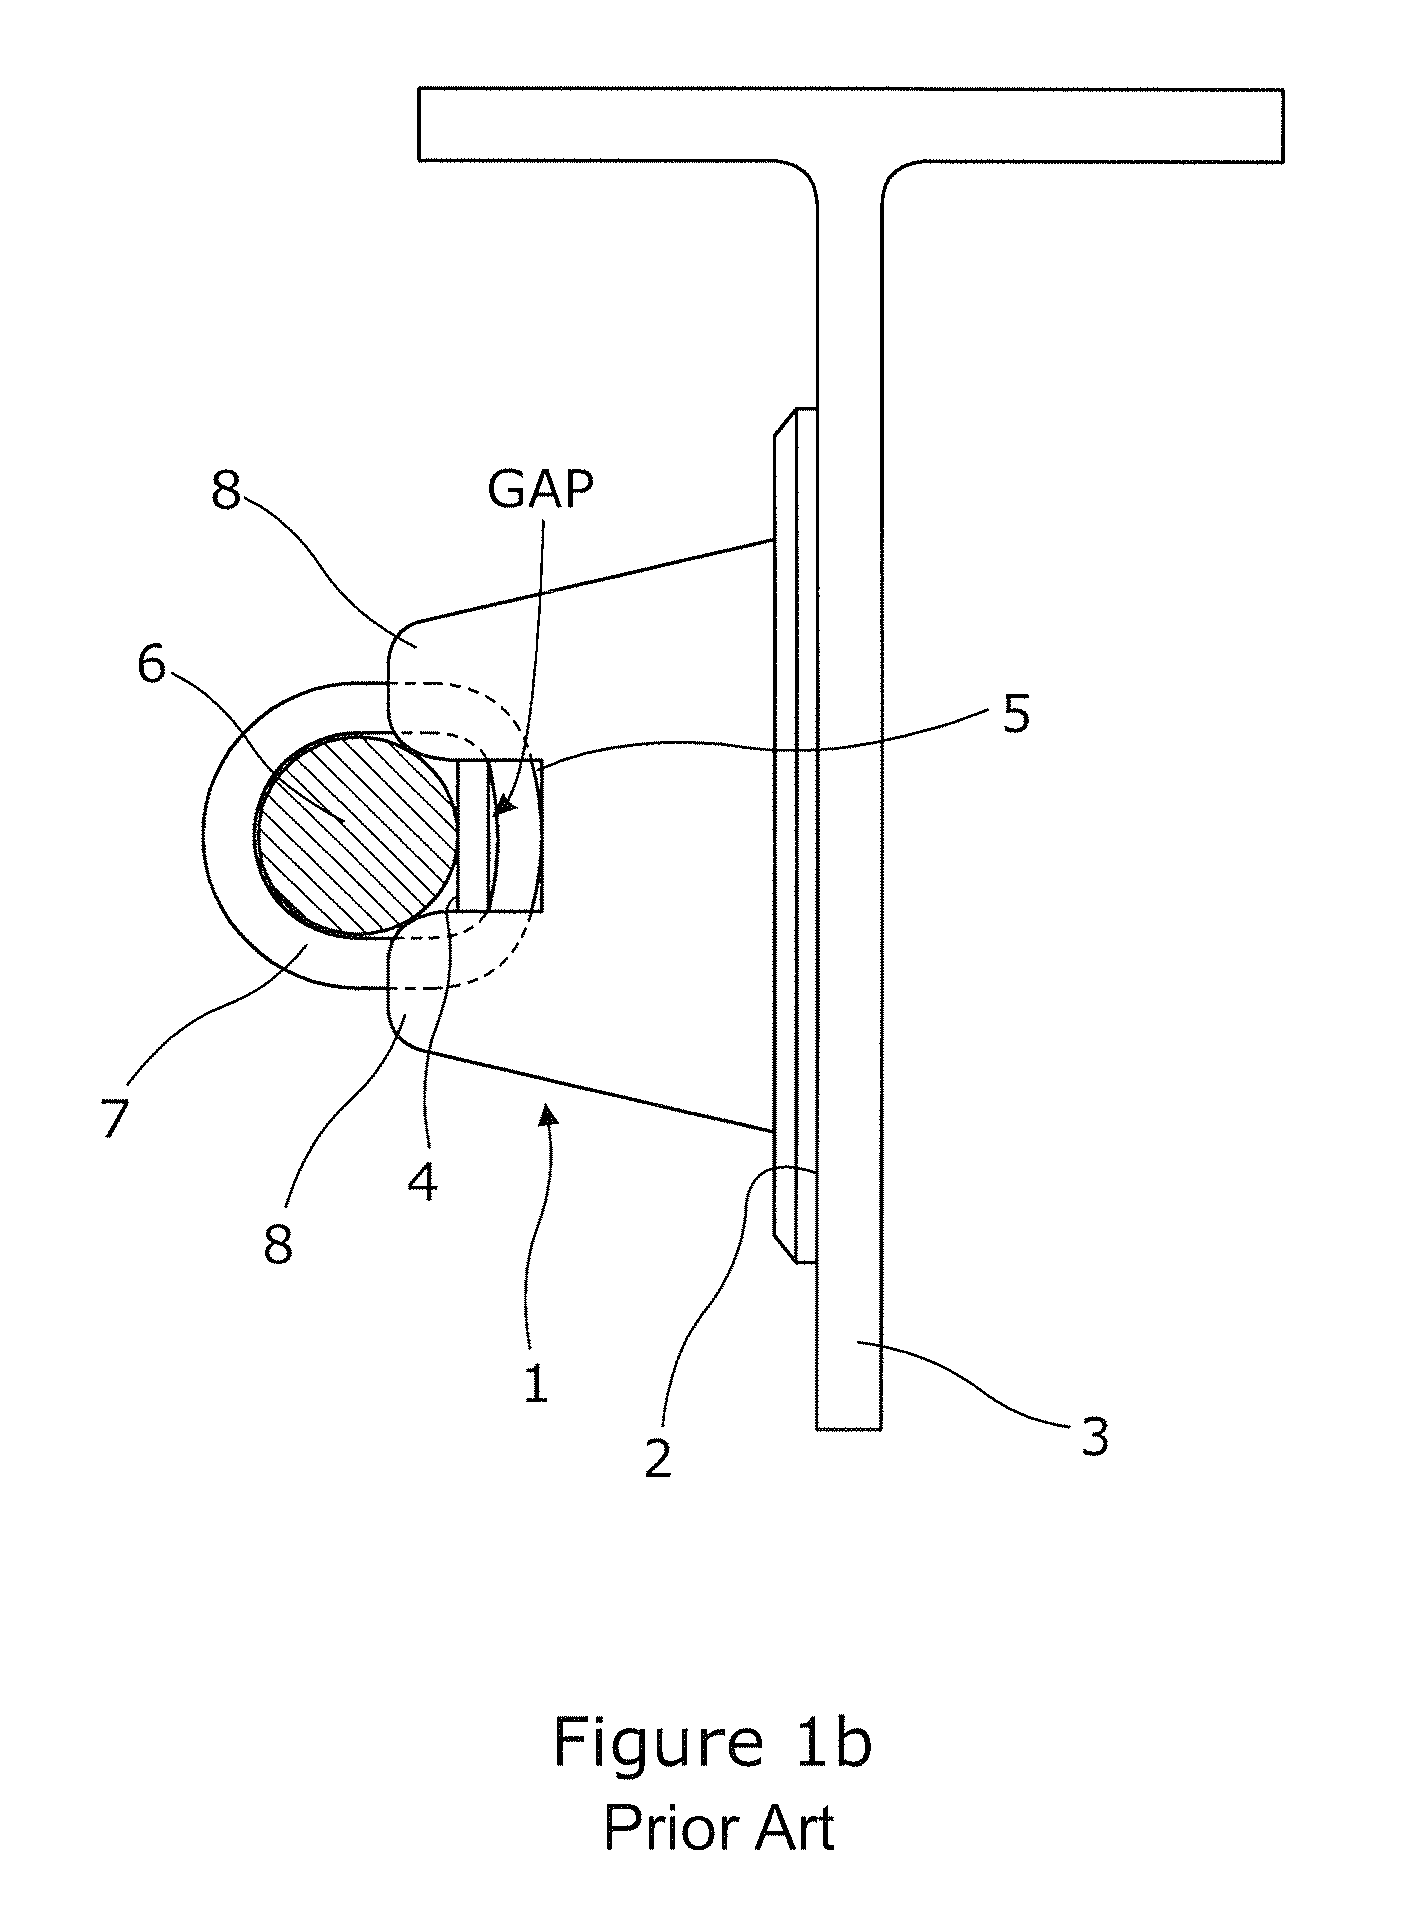 Bracket for attaching an electrical cable to a vehicle